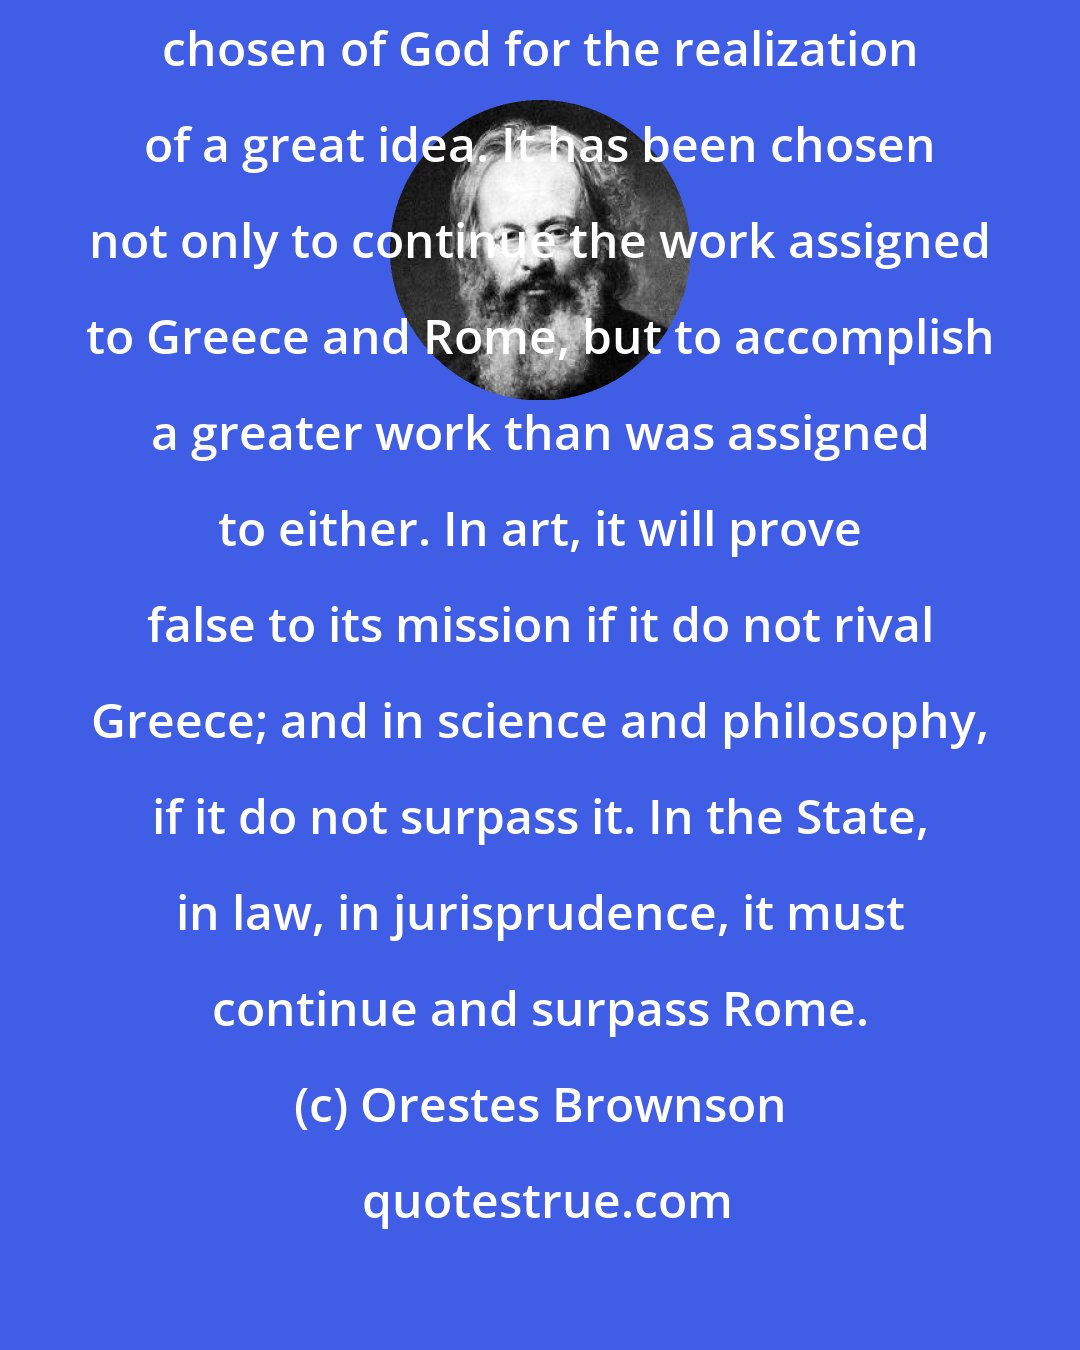 Orestes Brownson: The United States, or the American Republic, has a mission, and is chosen of God for the realization of a great idea. It has been chosen not only to continue the work assigned to Greece and Rome, but to accomplish a greater work than was assigned to either. In art, it will prove false to its mission if it do not rival Greece; and in science and philosophy, if it do not surpass it. In the State, in law, in jurisprudence, it must continue and surpass Rome.